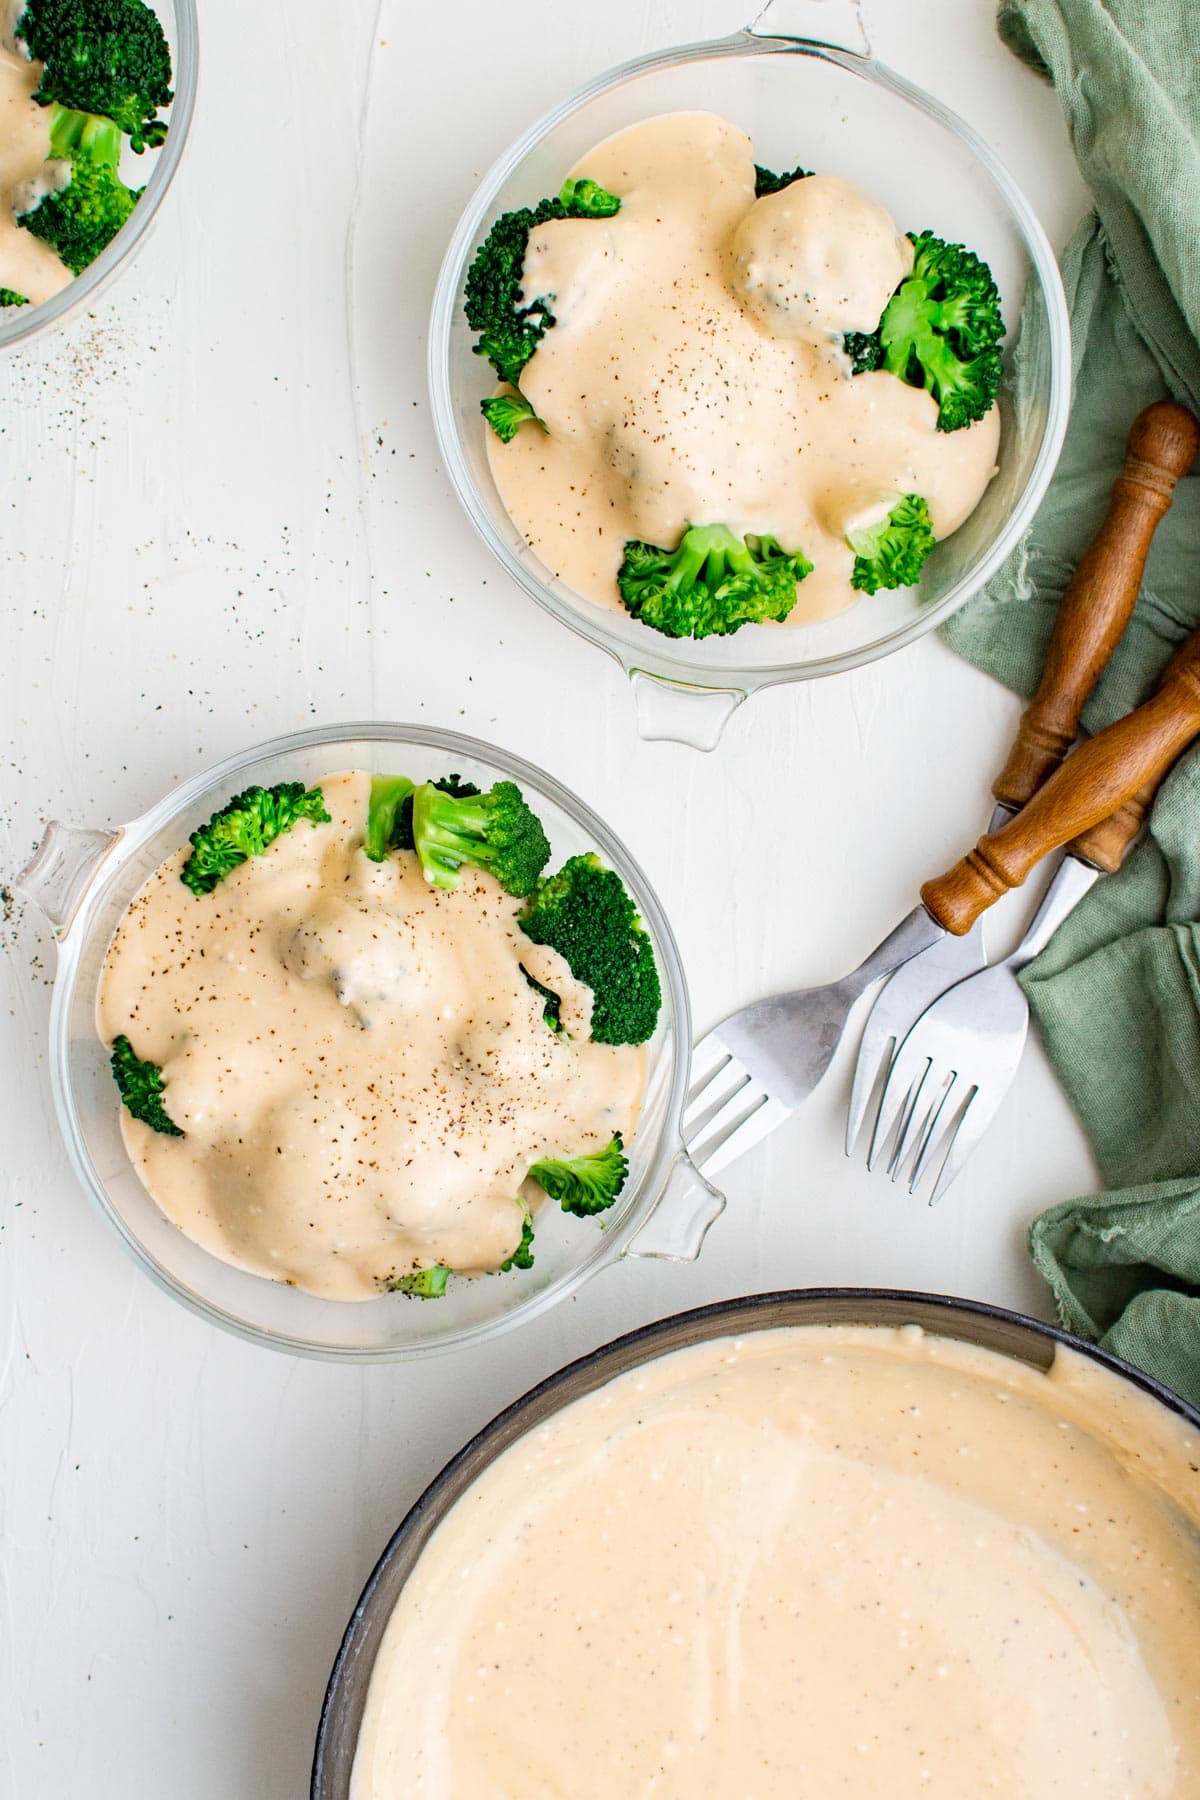 ckillet with cheese sauce, broccoli with cheese on plates, forks, 